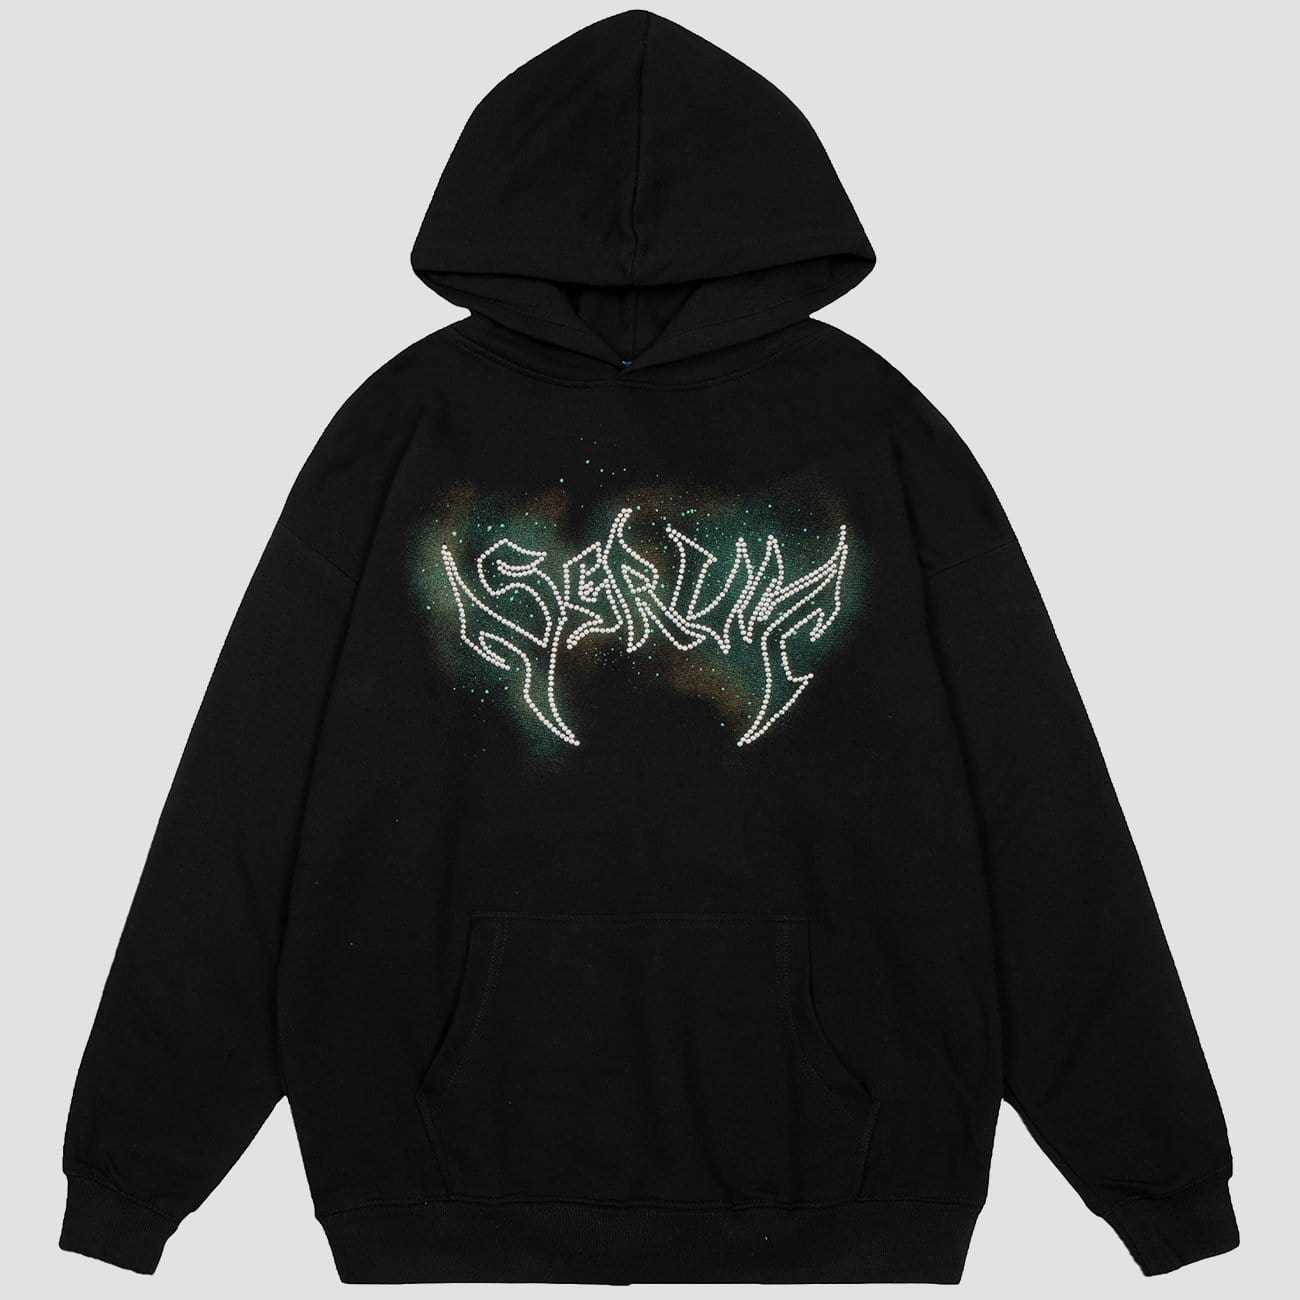 TO Tie Dye Letters Drill Hoodie